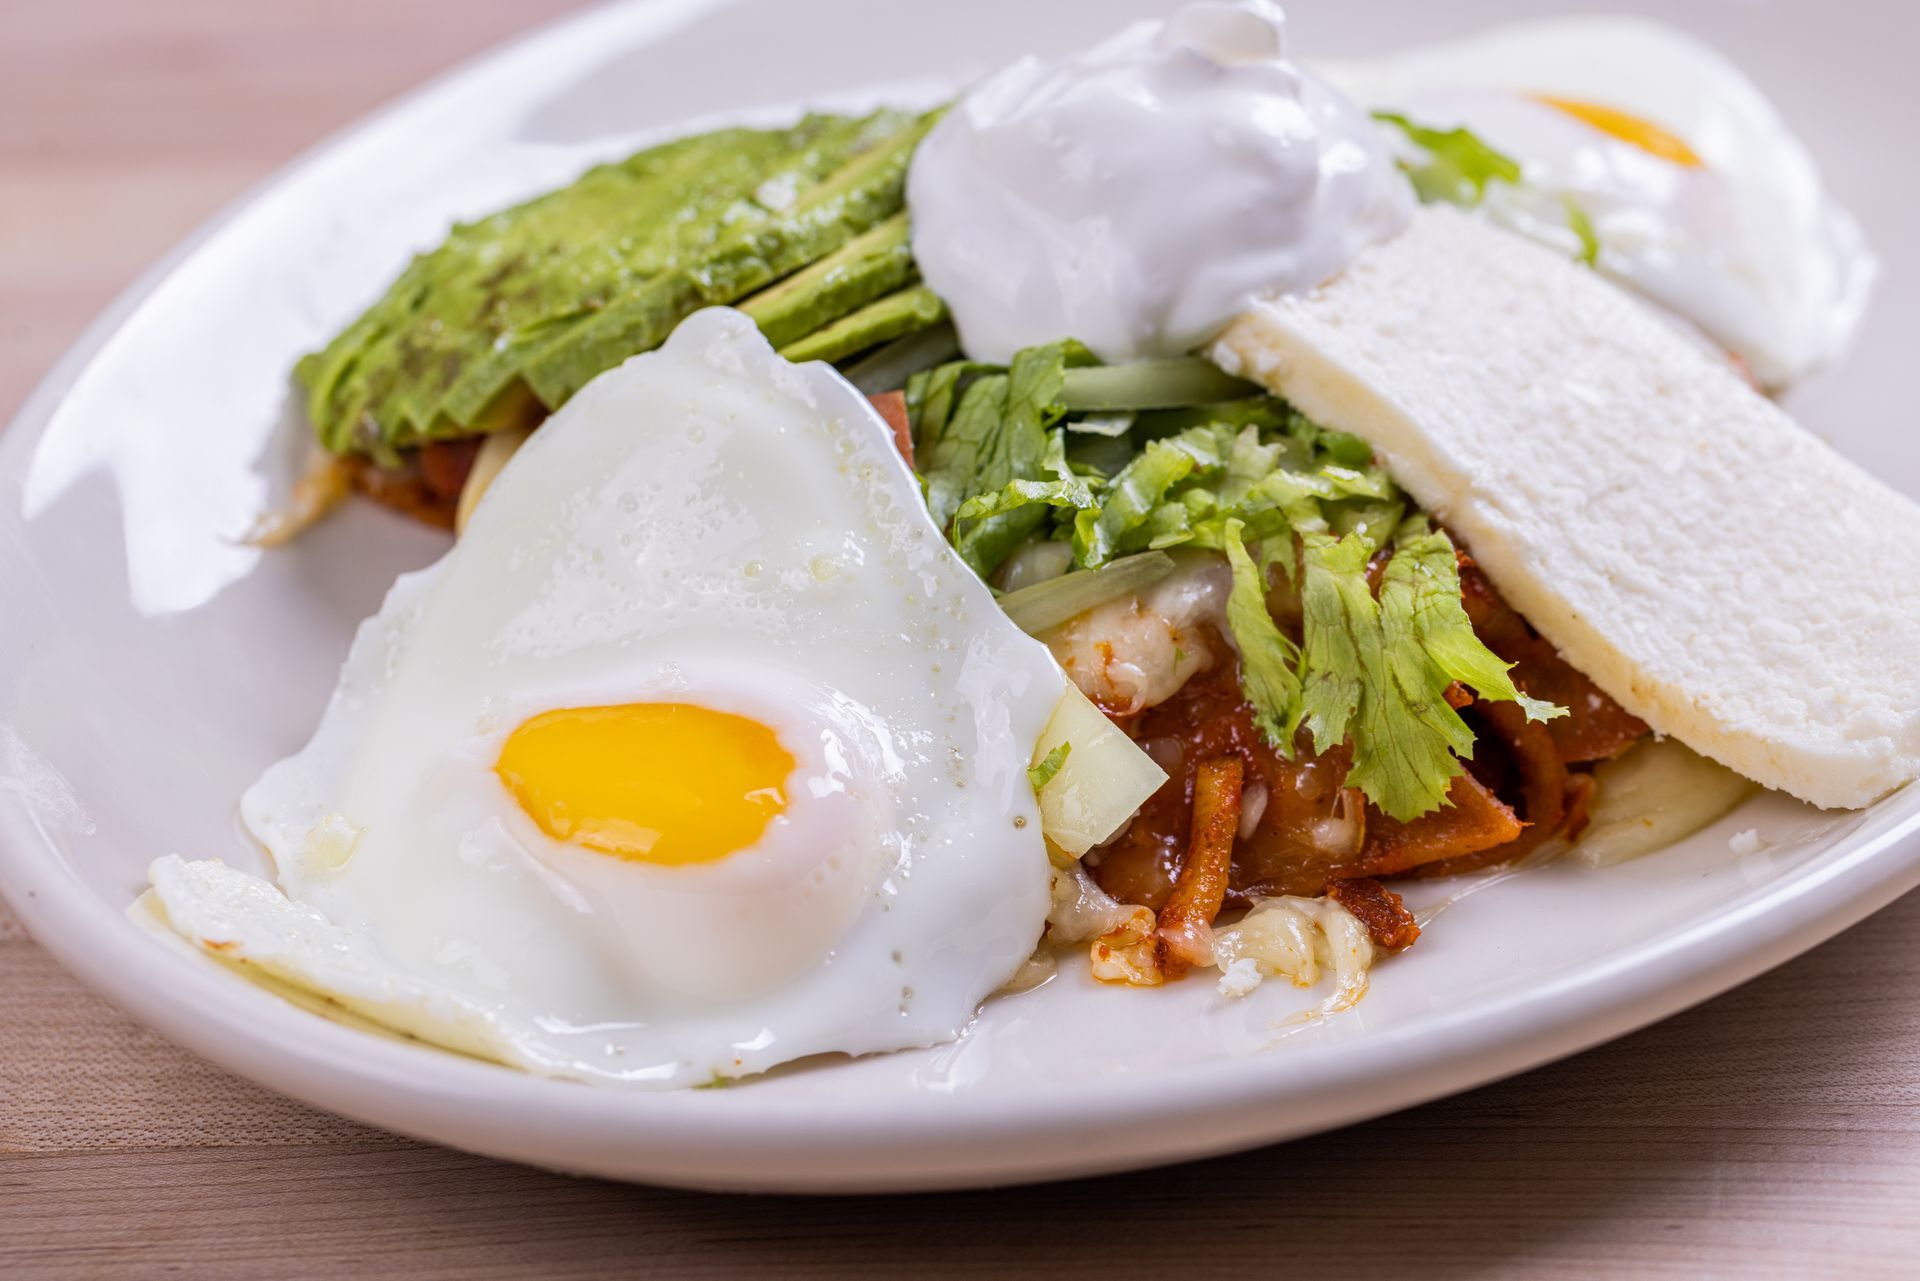 Scratch made Chilaquiles Breakfast